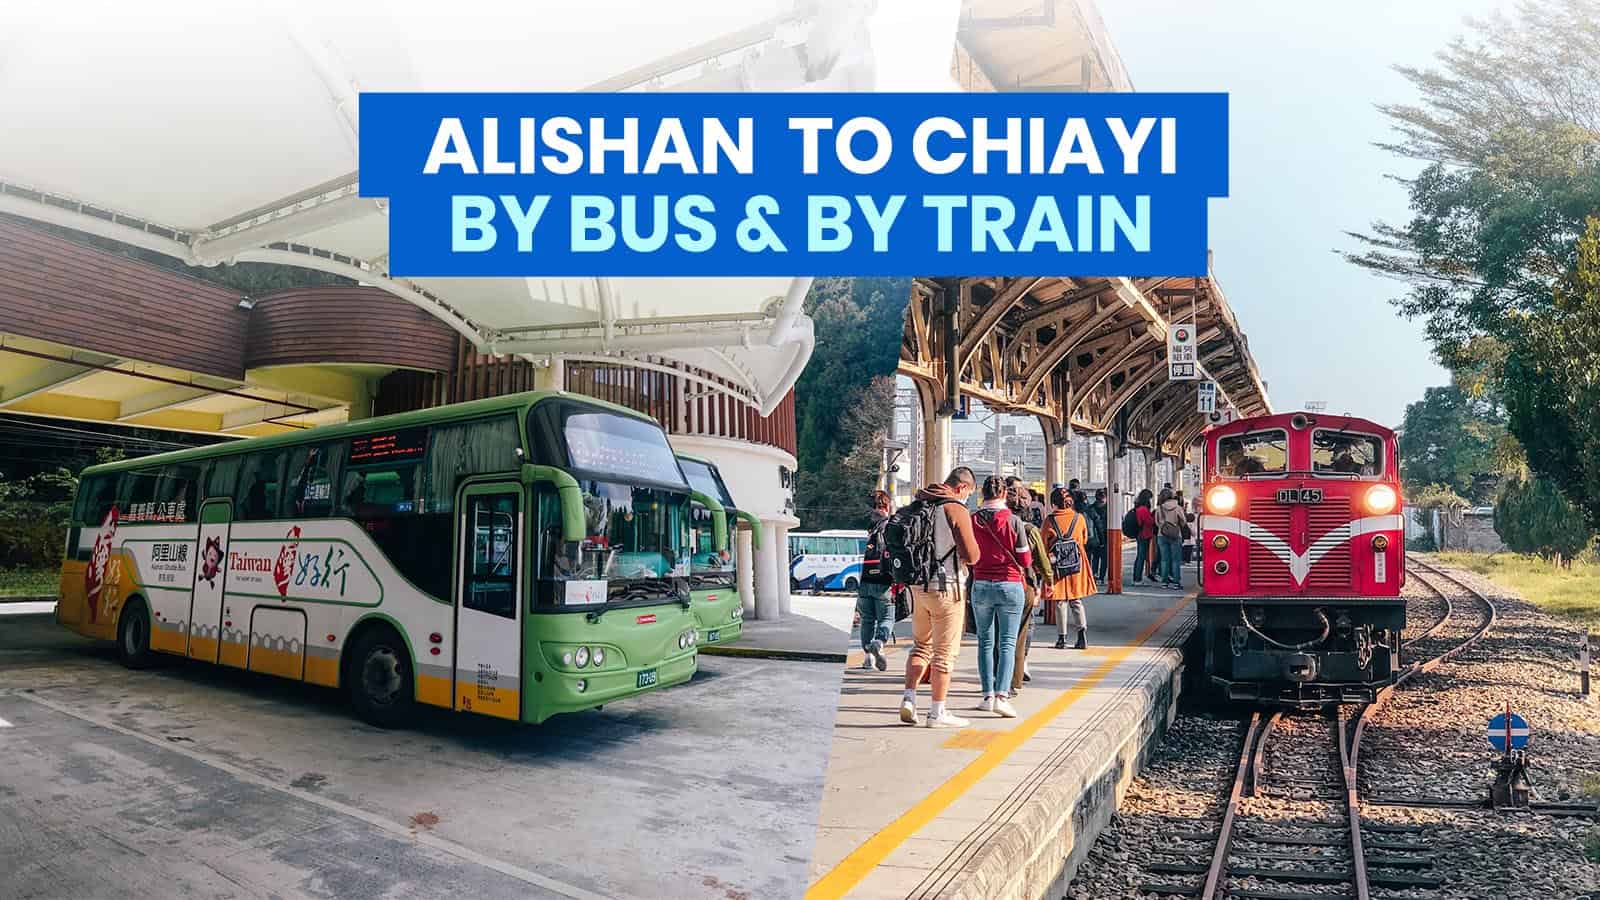 ALISHAN TO CHIAYI by DIRECT BUS & TRAIN: Schedule & Fares